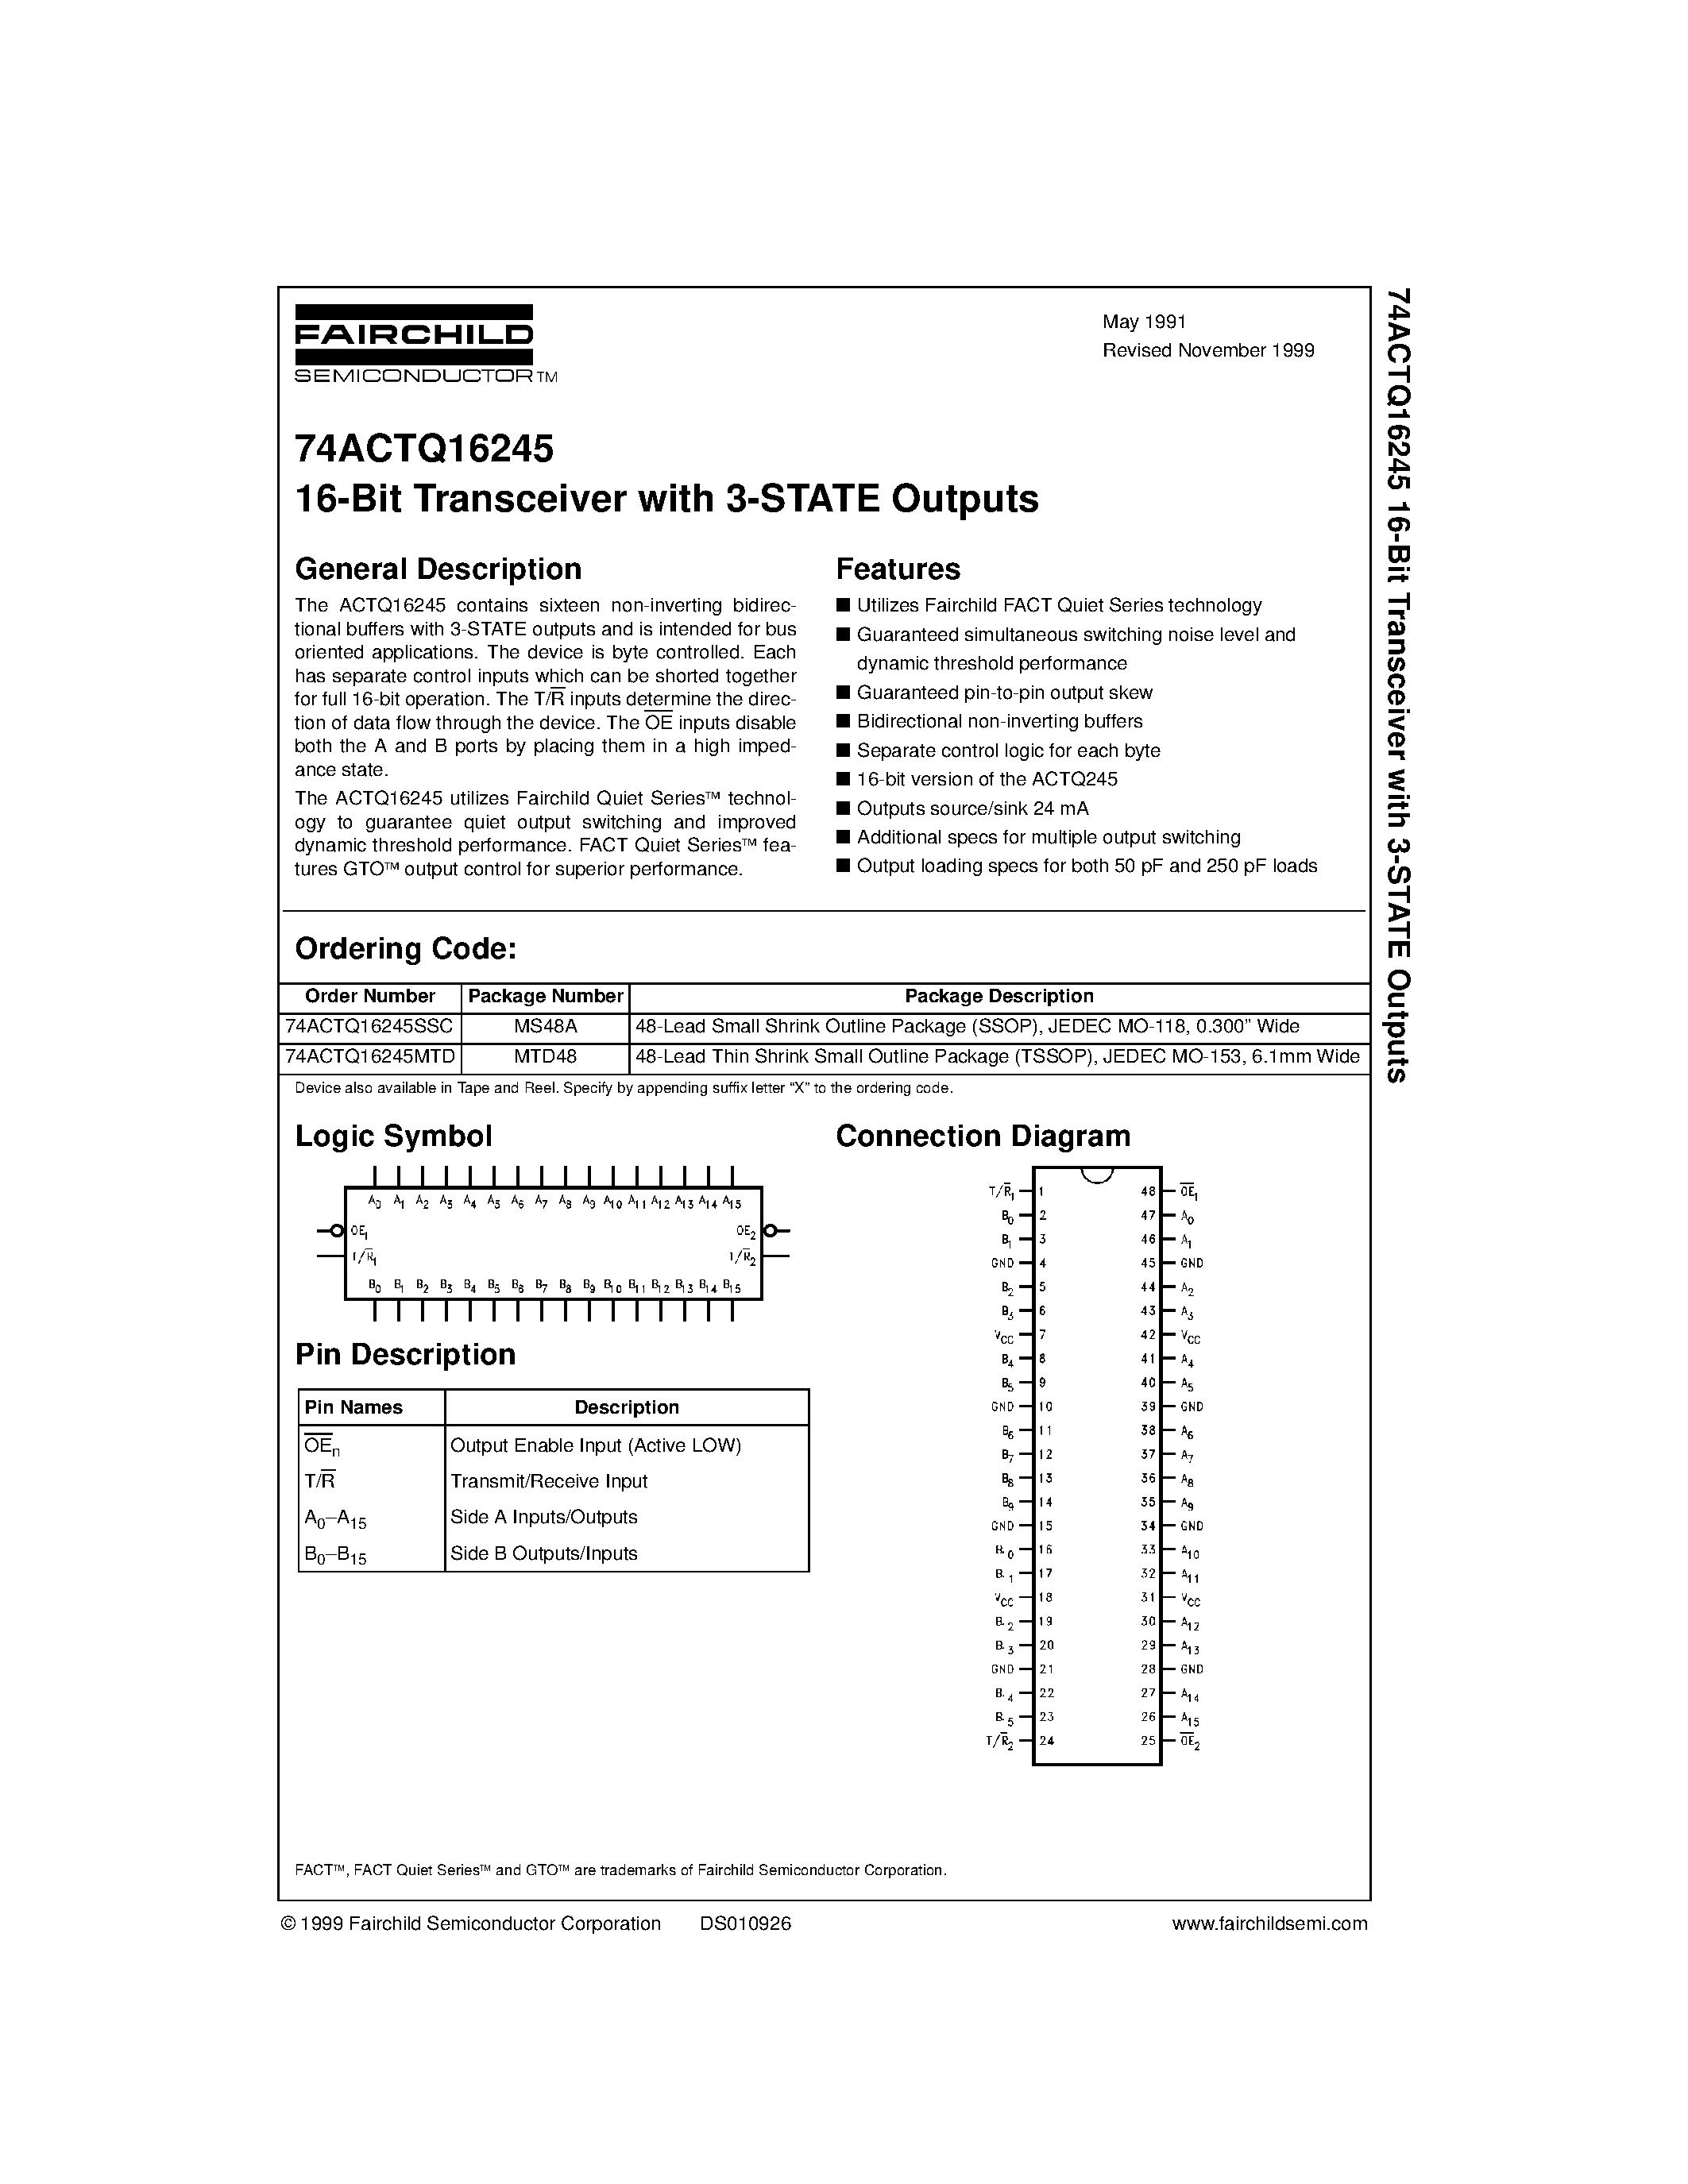 Datasheet 74ACTQ16245 - 16-Bit Transceiver with 3-STATE Outputs page 1